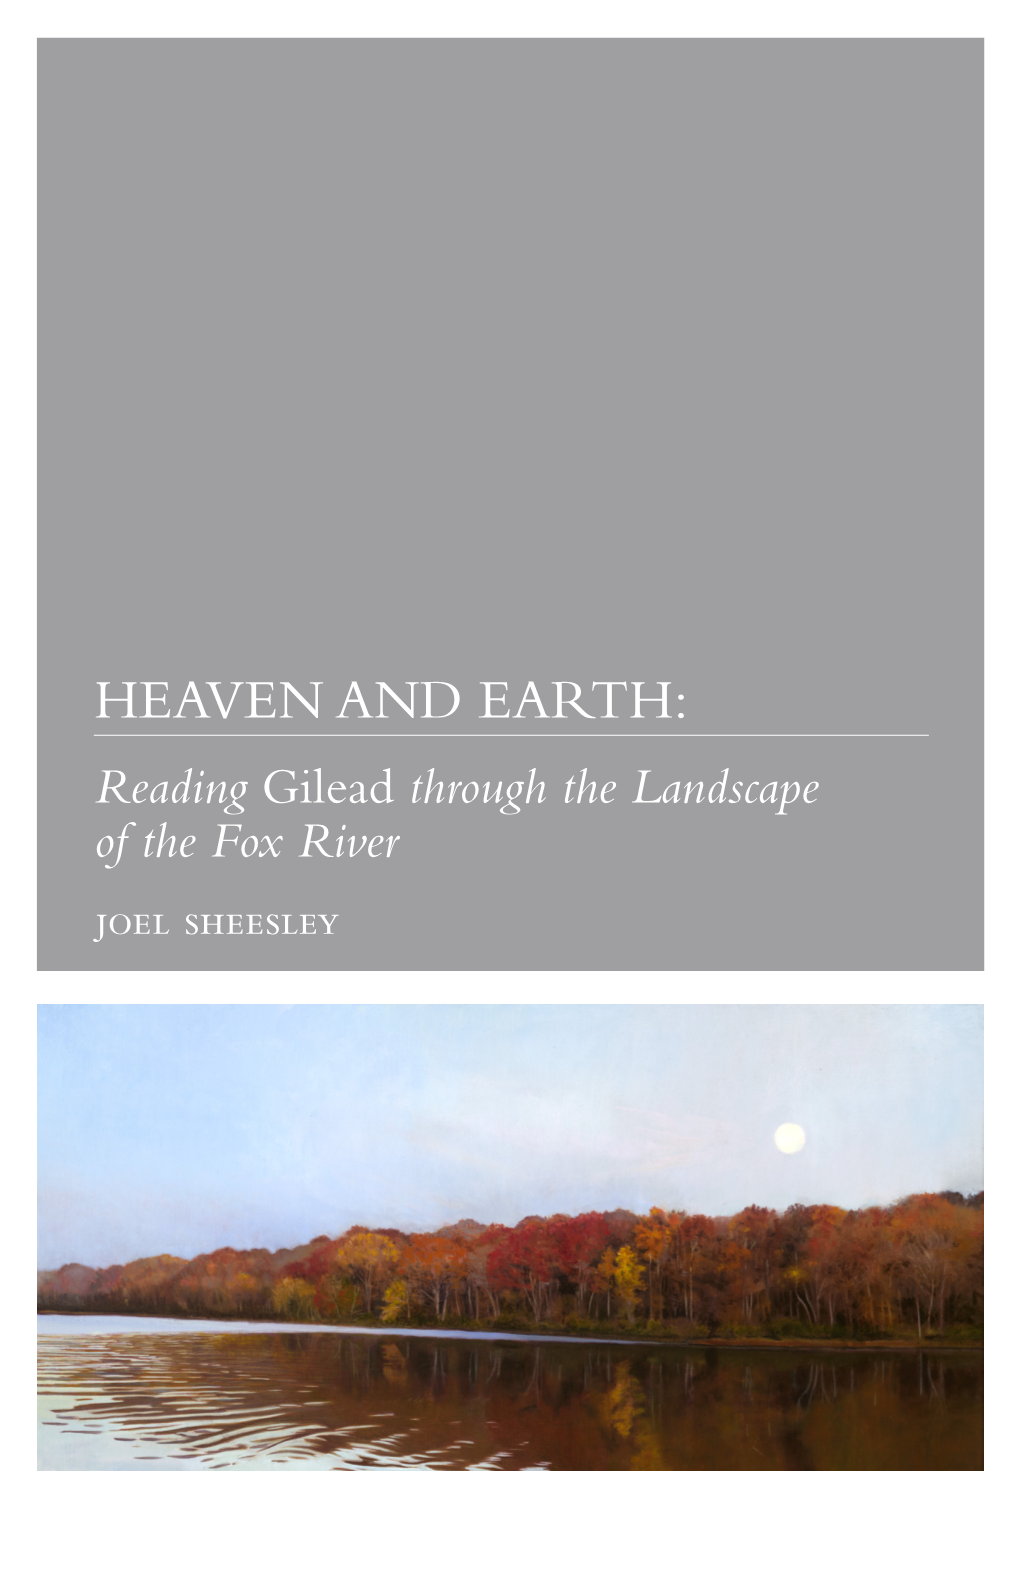 HEAVEN and EARTH: Reading Gilead Through the Landscape of the Fox River Joel Sheesley 2 | Heaven and Earth October 2, 2017 | 3